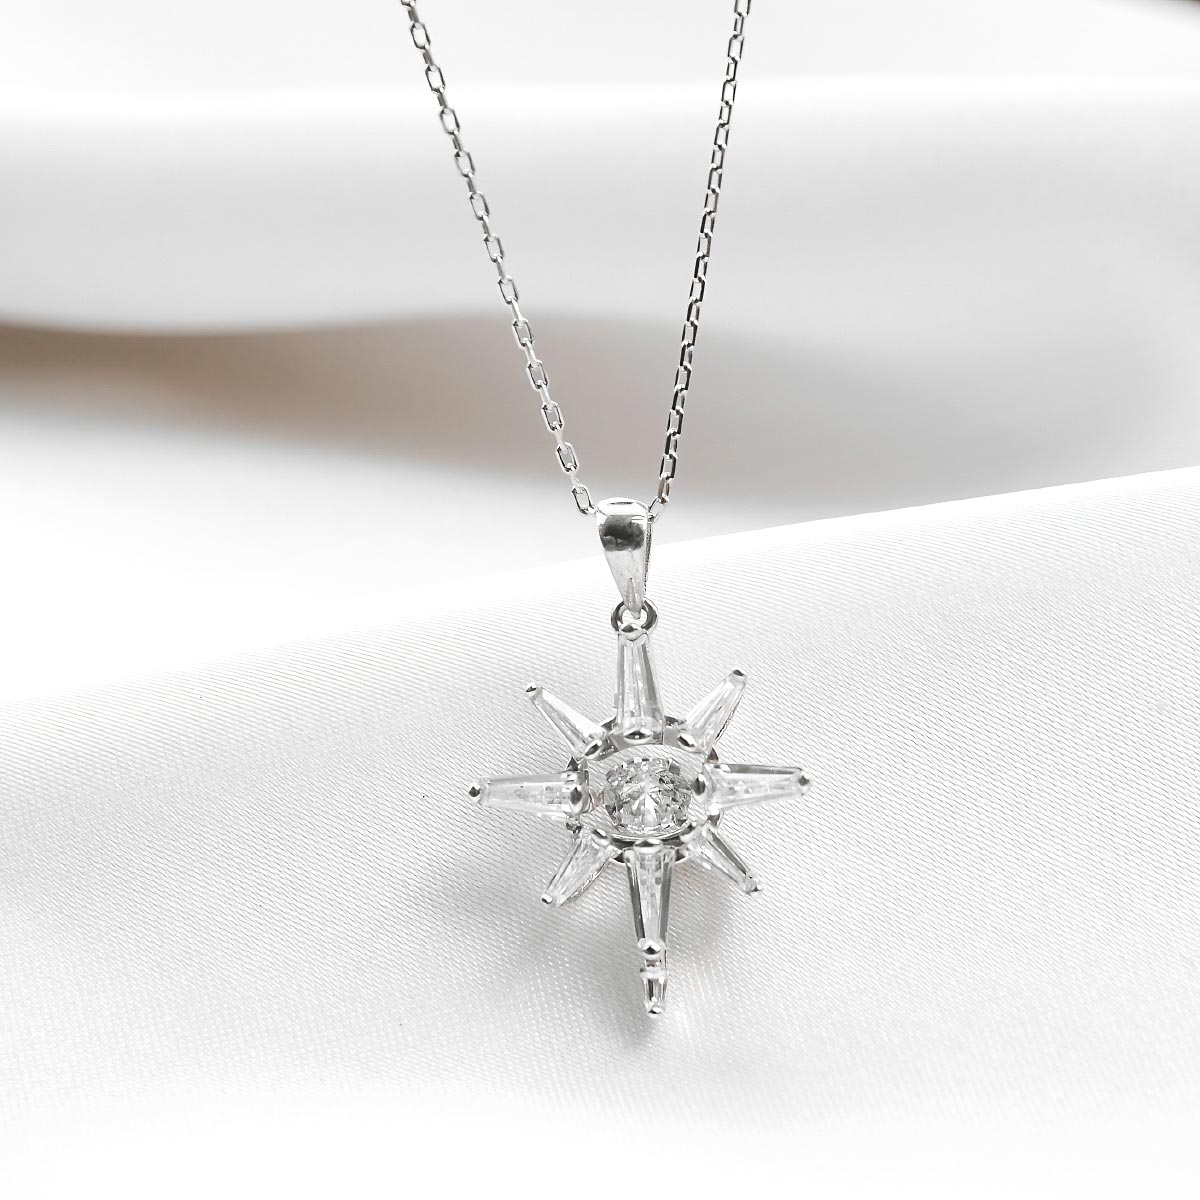 Made of Stars - Dancing Crystal Star Necklace Gift Set